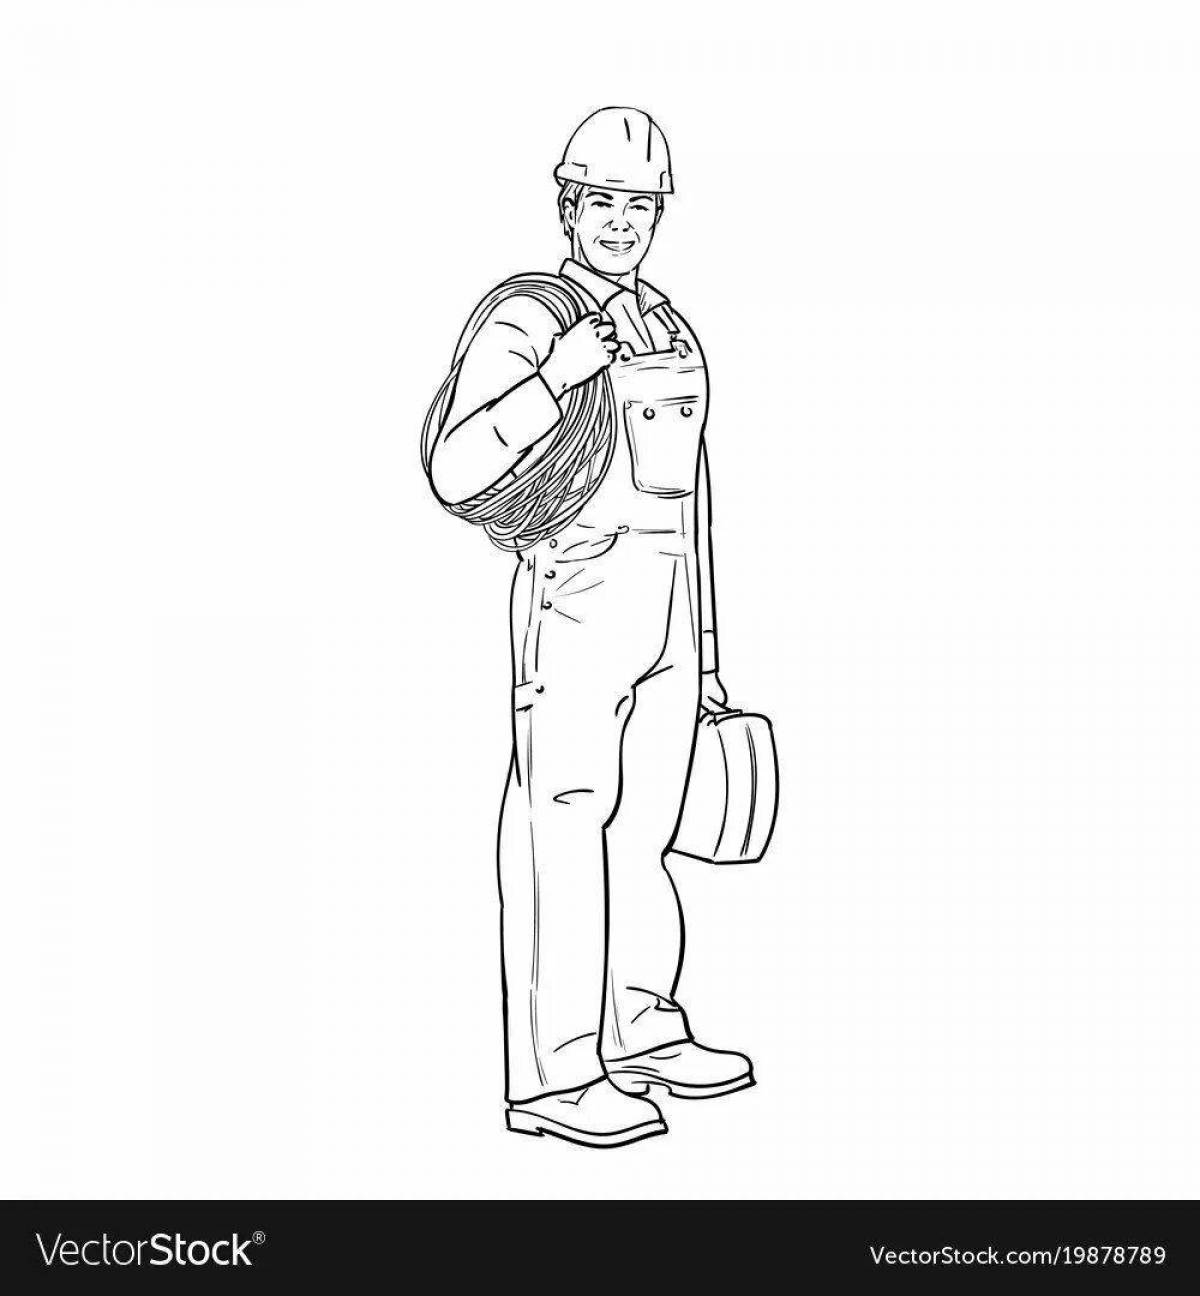 A funny electrician coloring book